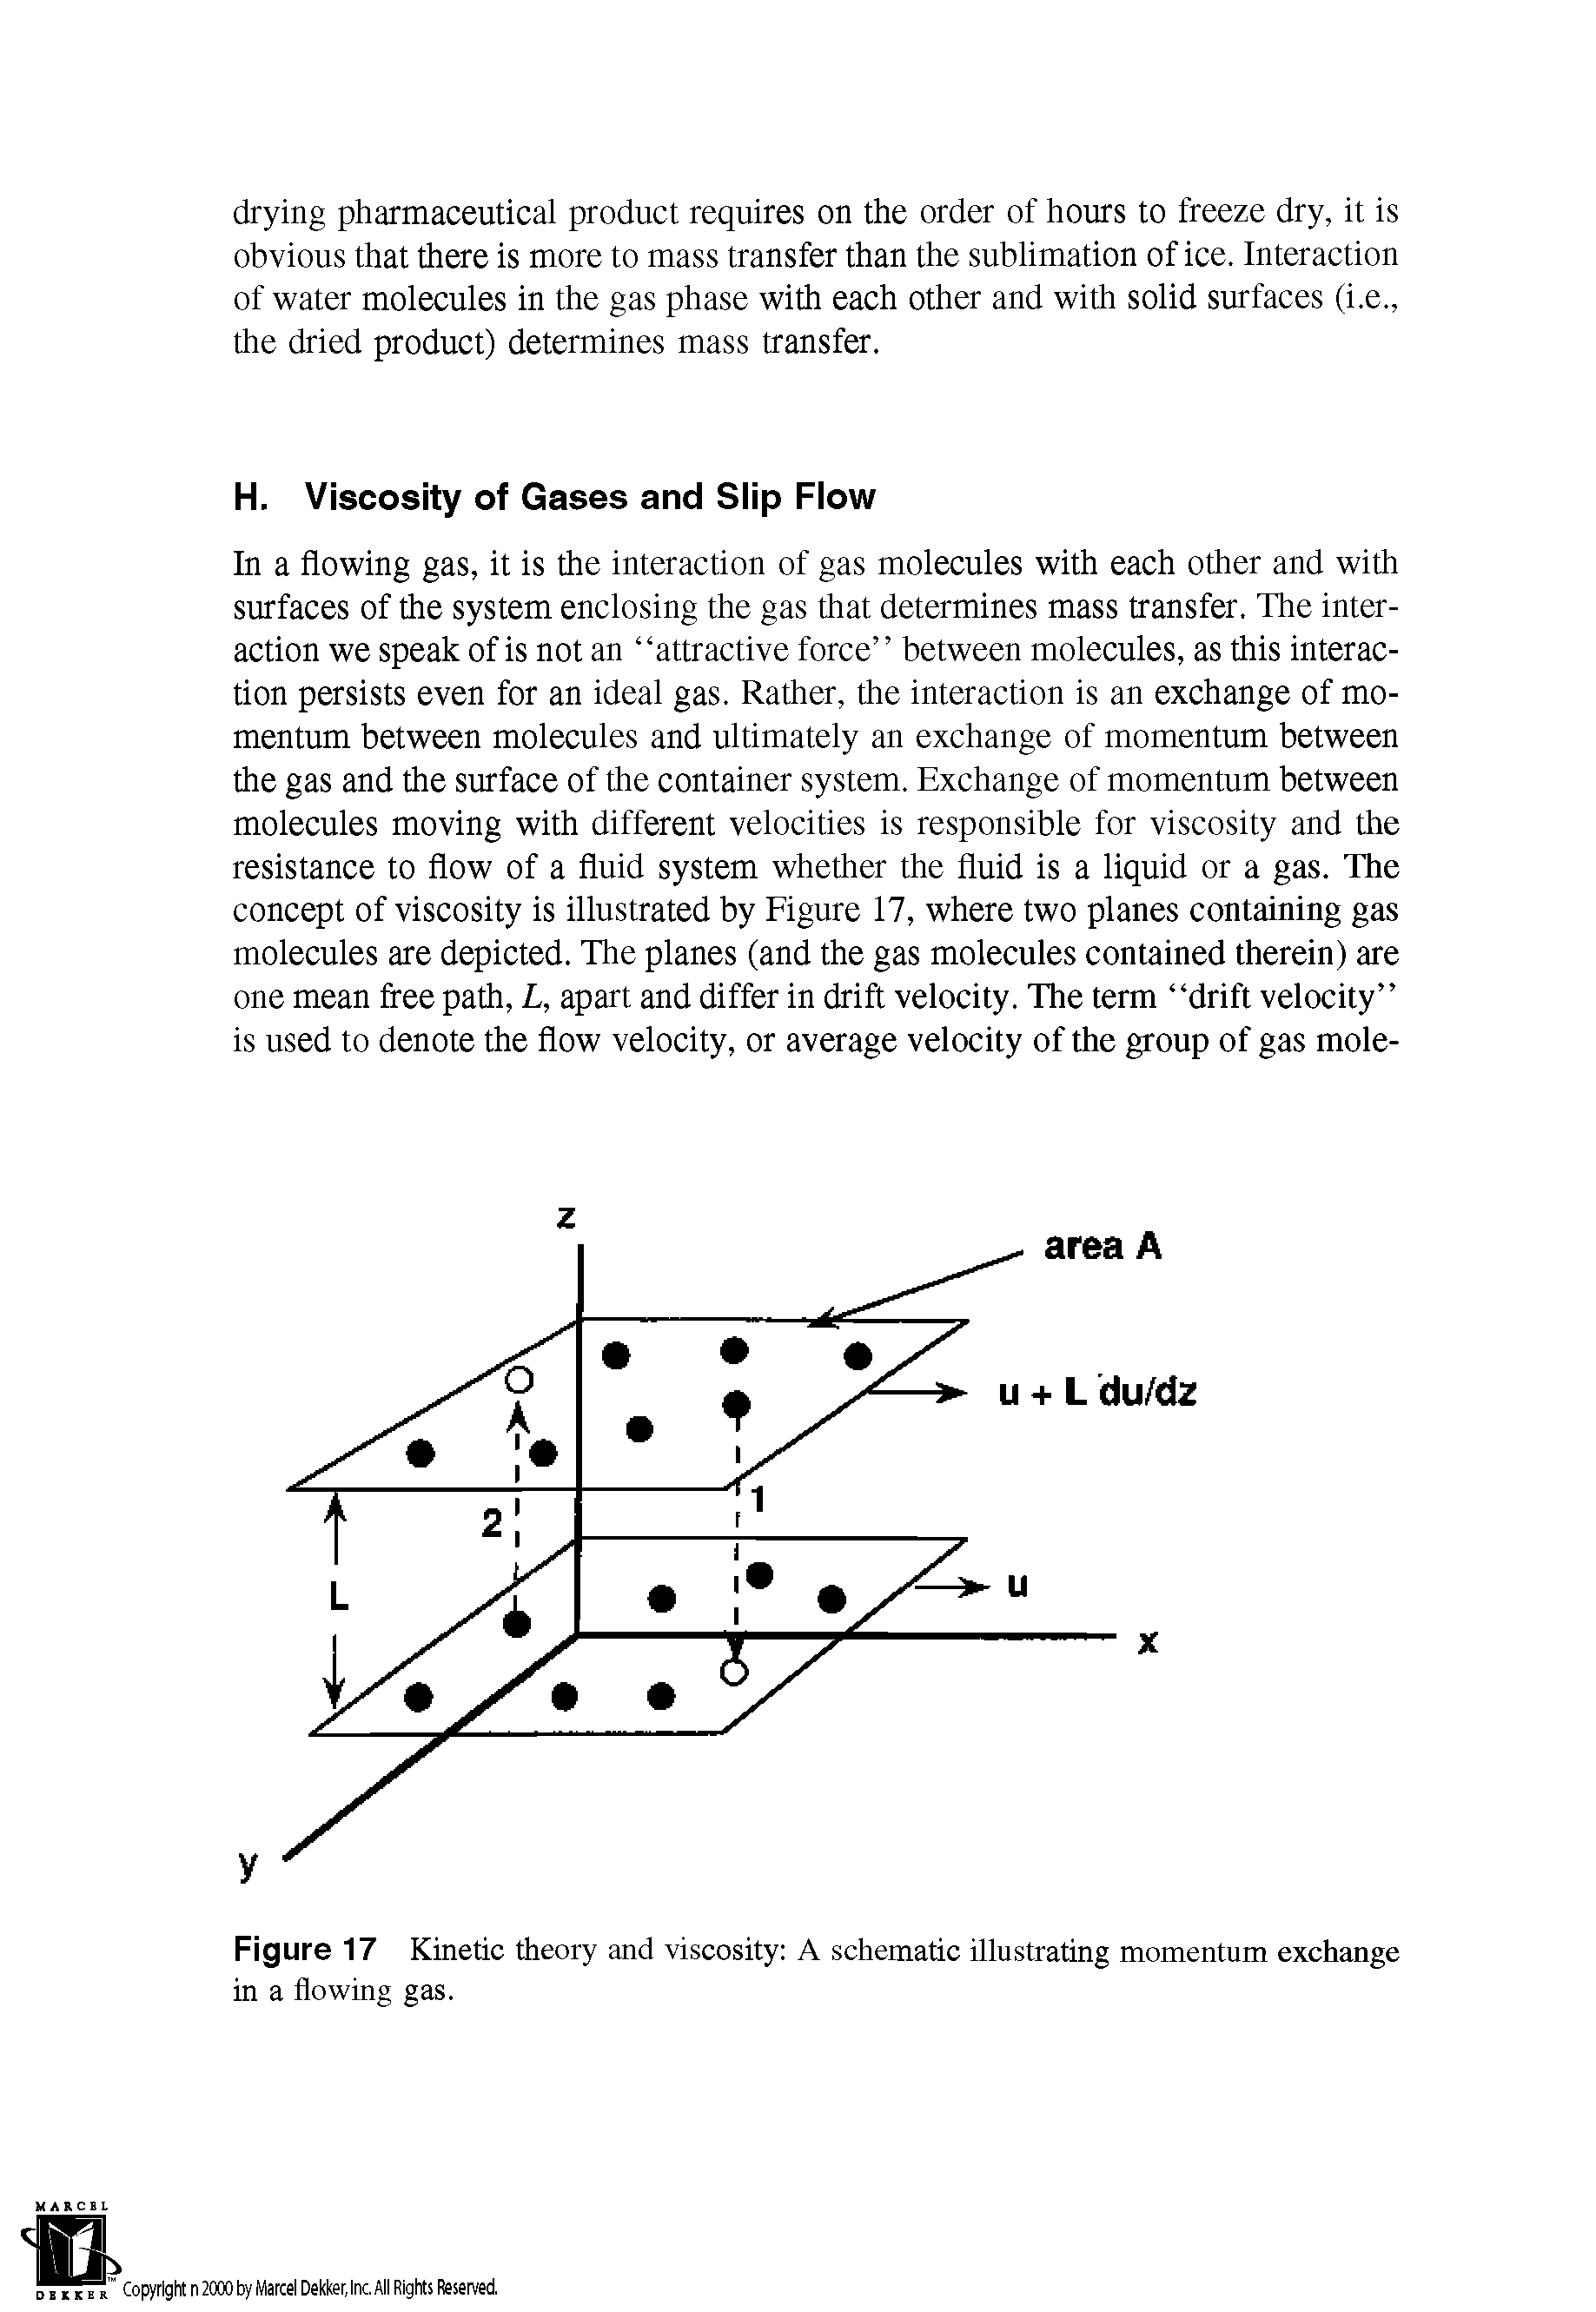 Figure 17 Kinetic theory and viscosity A schematic illustrating momentum exchange in a flowing gas.